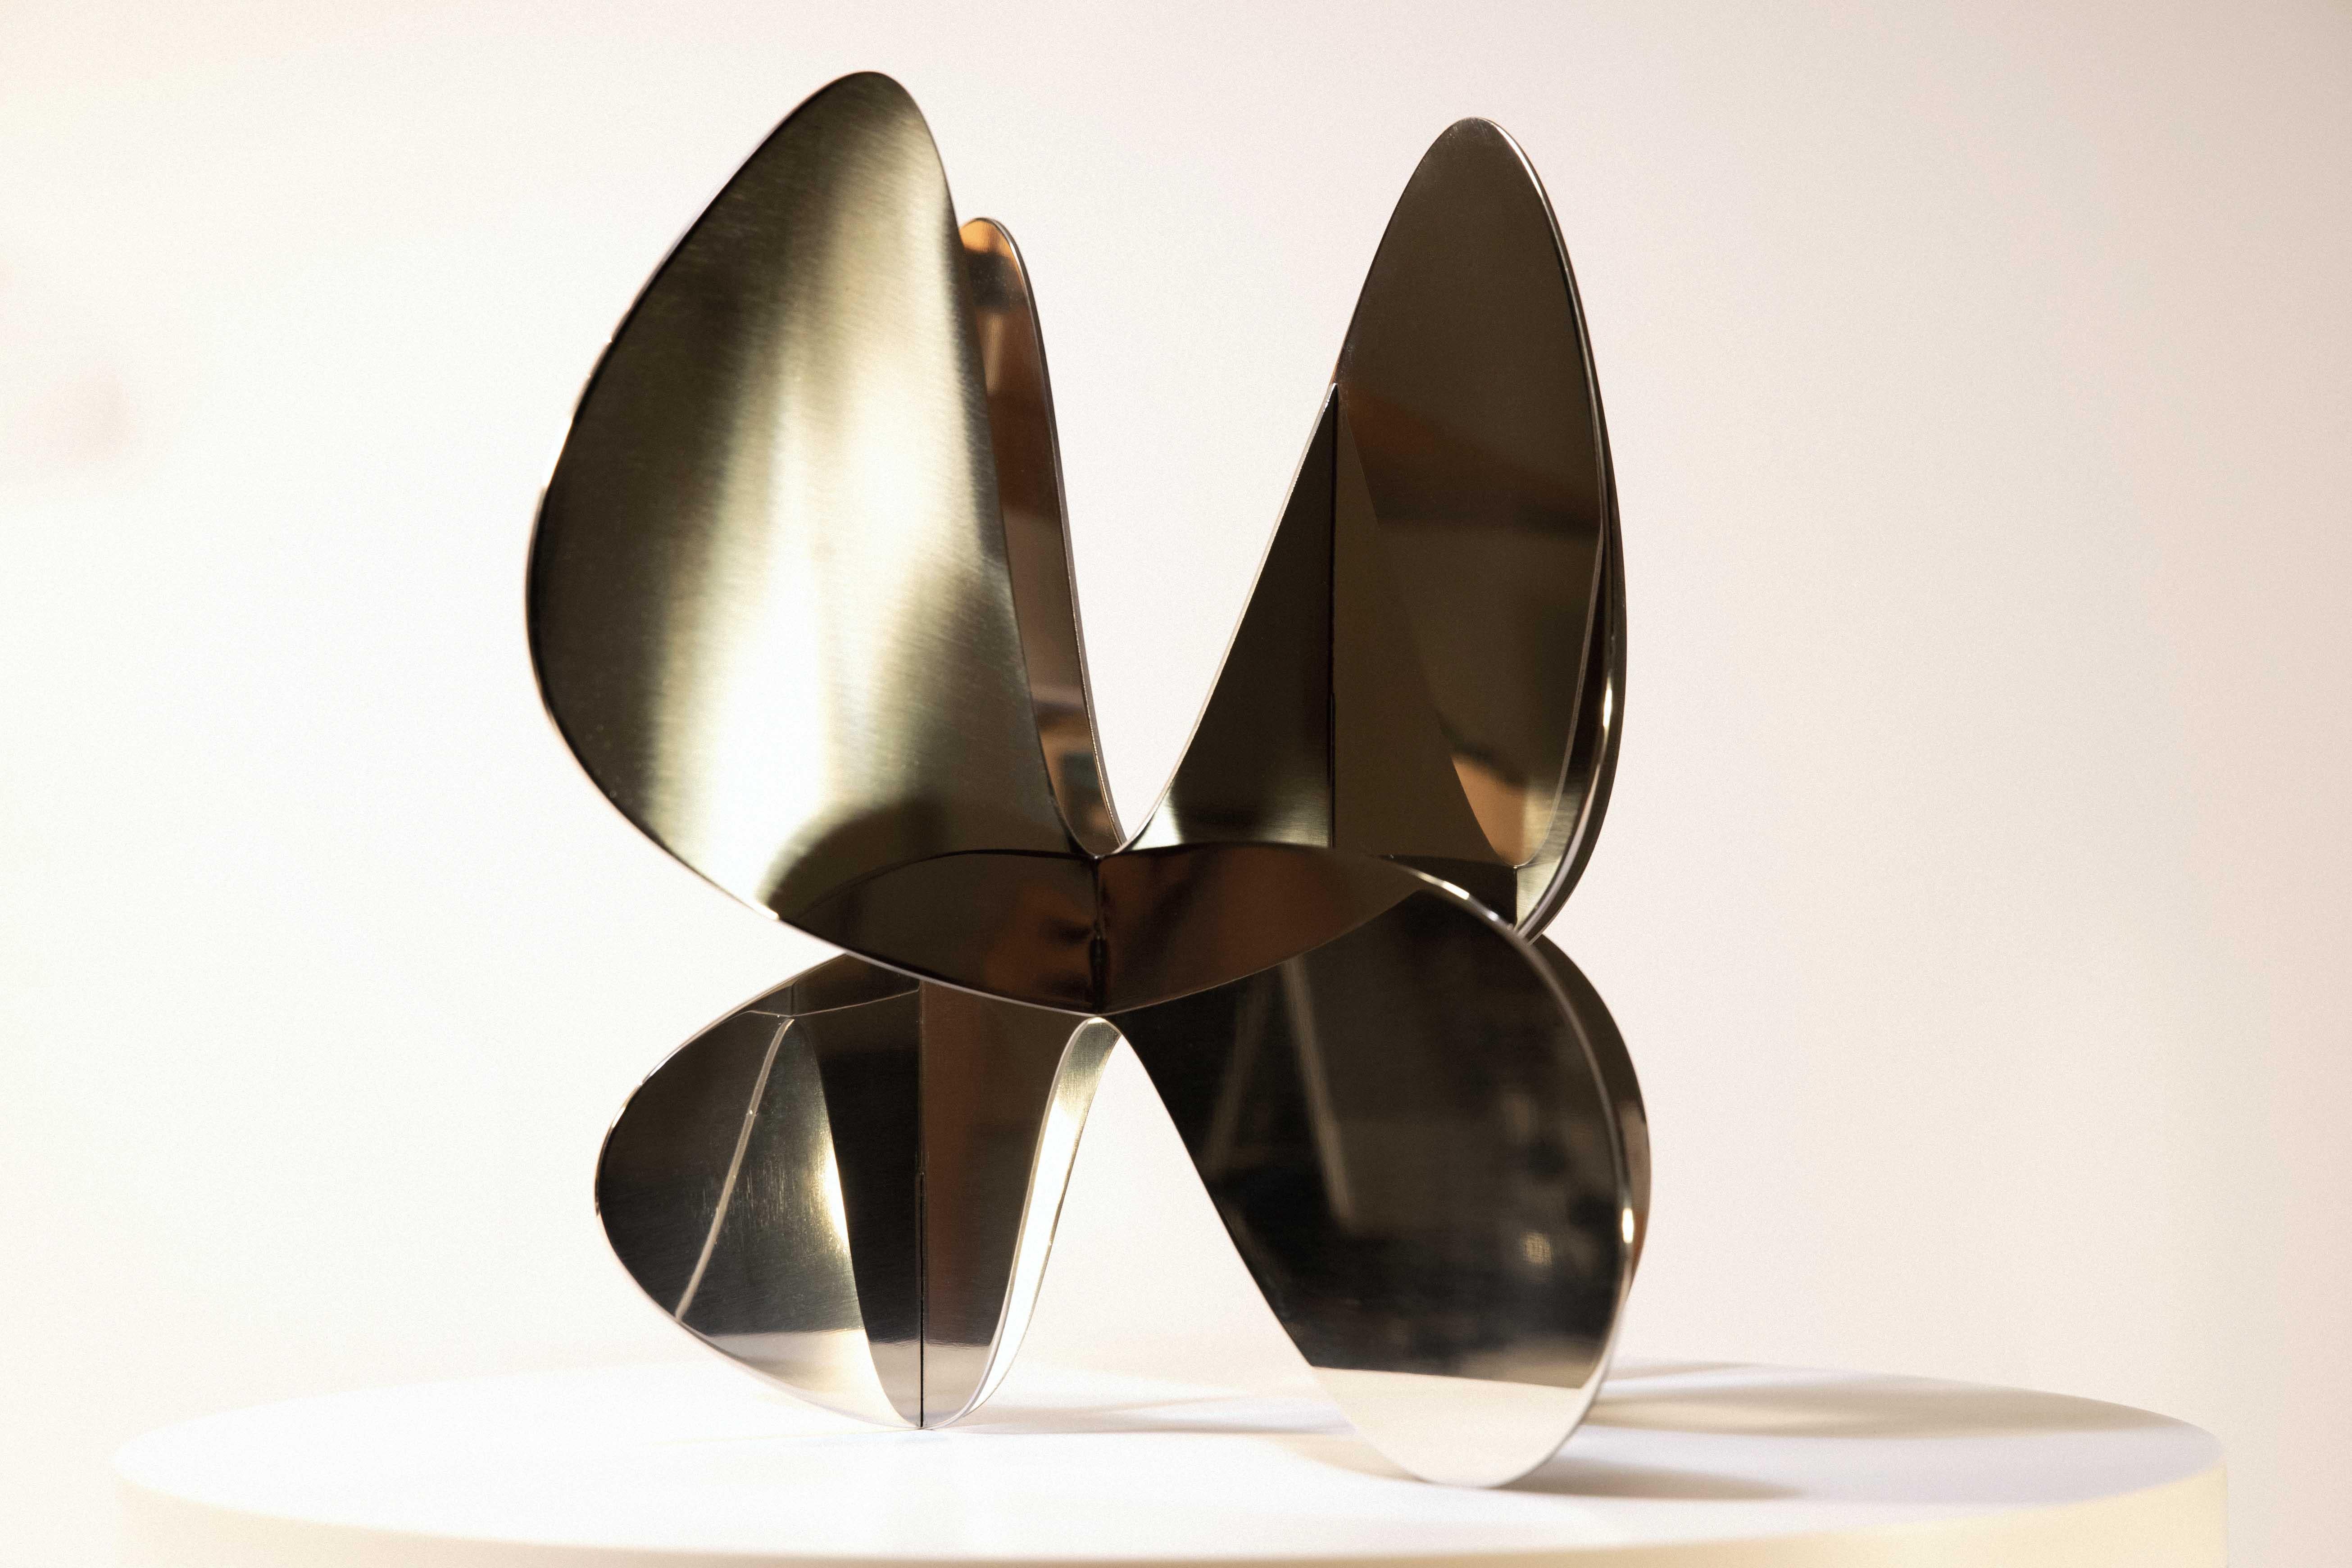 Barricada #7 aip S is a brushed stainless steel sculpture by contemporary artist Alejandro Vega Beuvrin, dimensions are 32 × 39 × 38 cm (12.6 × 15.4 × 15 in). 
The sculpture is signed and numbered, it is part of a limited edition of 5 editions + 3